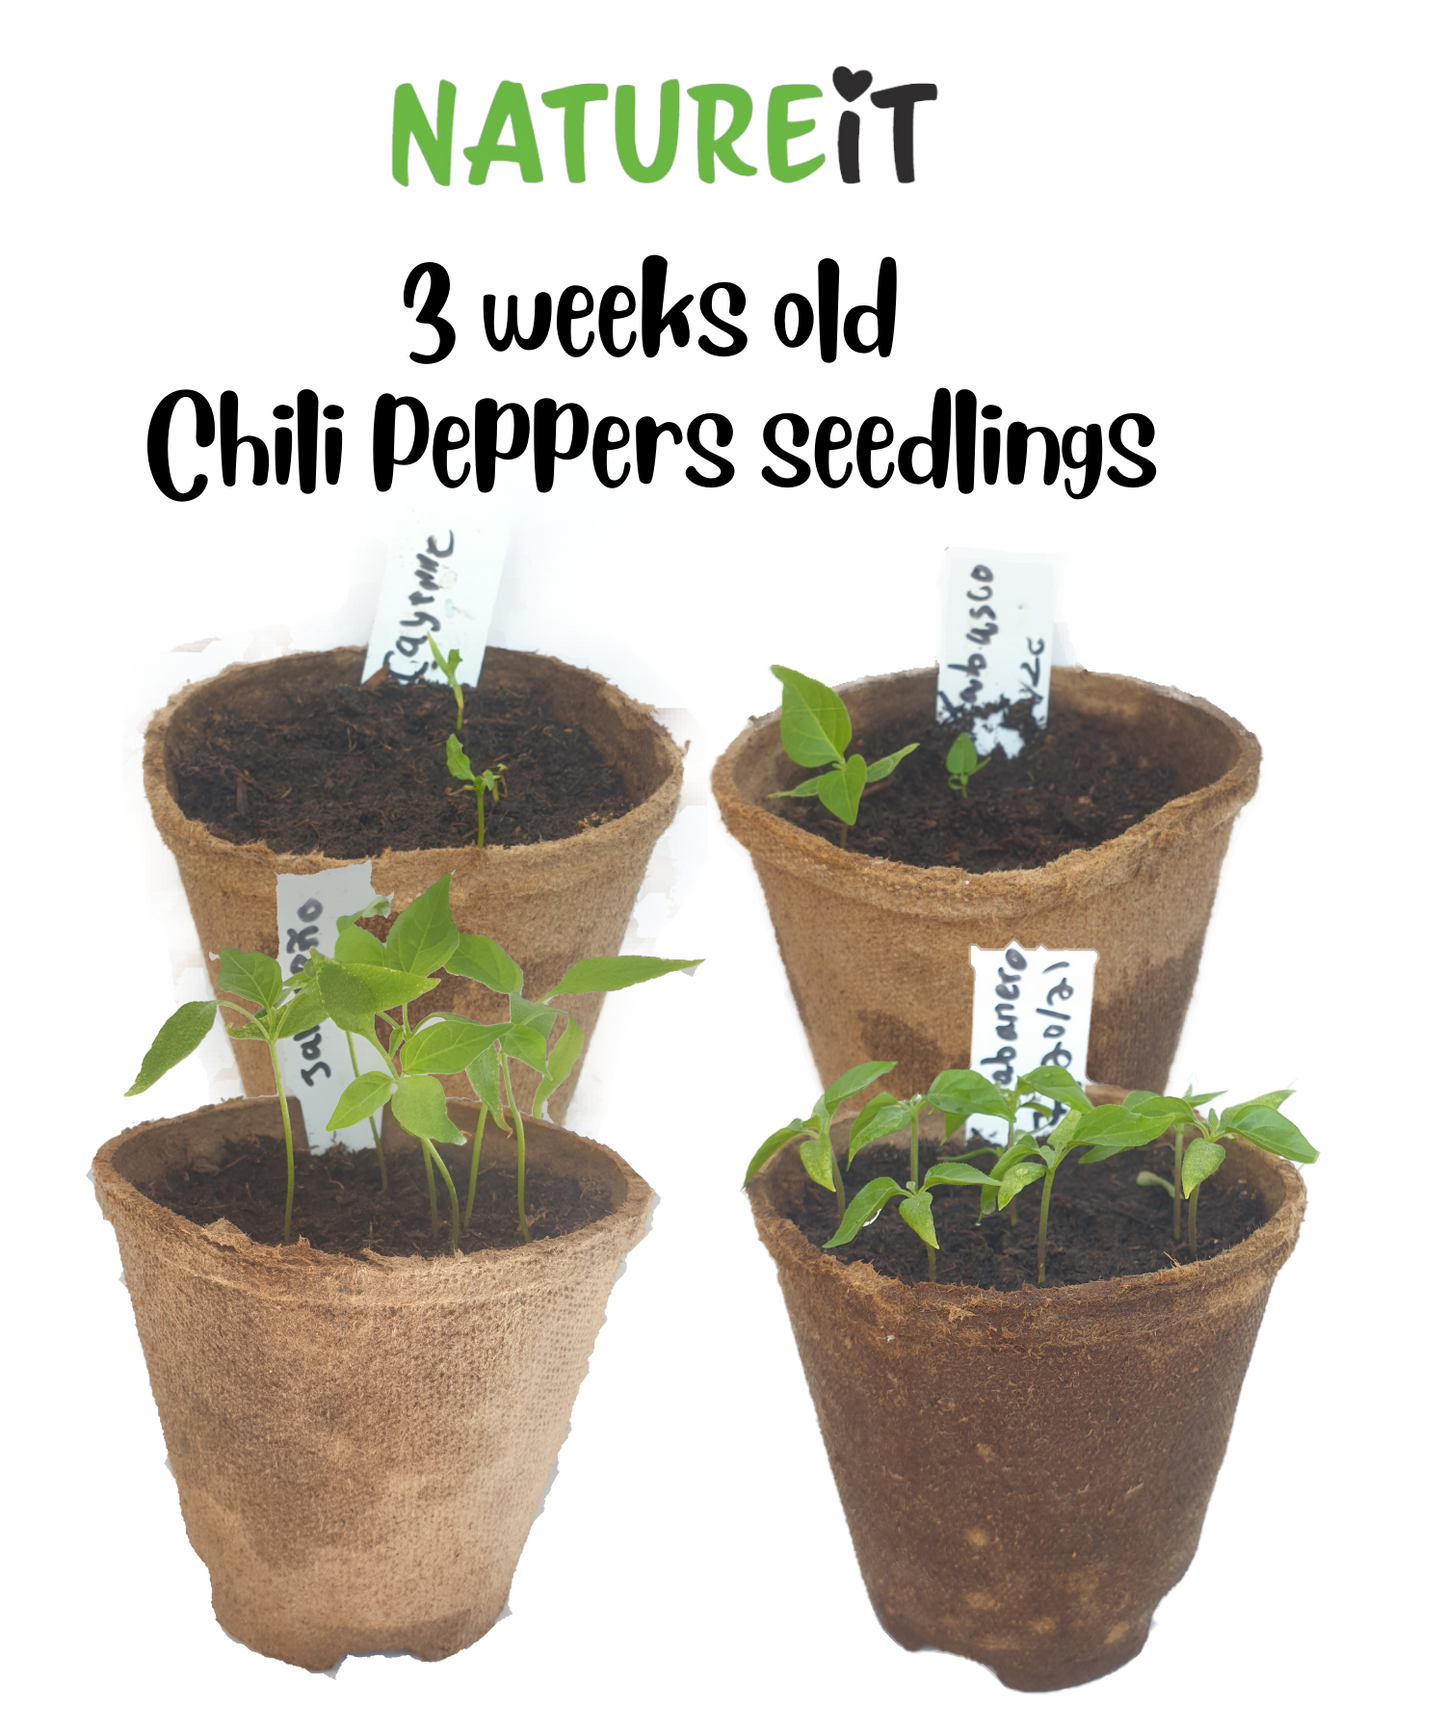 Hot chili peppers 3 weeks old